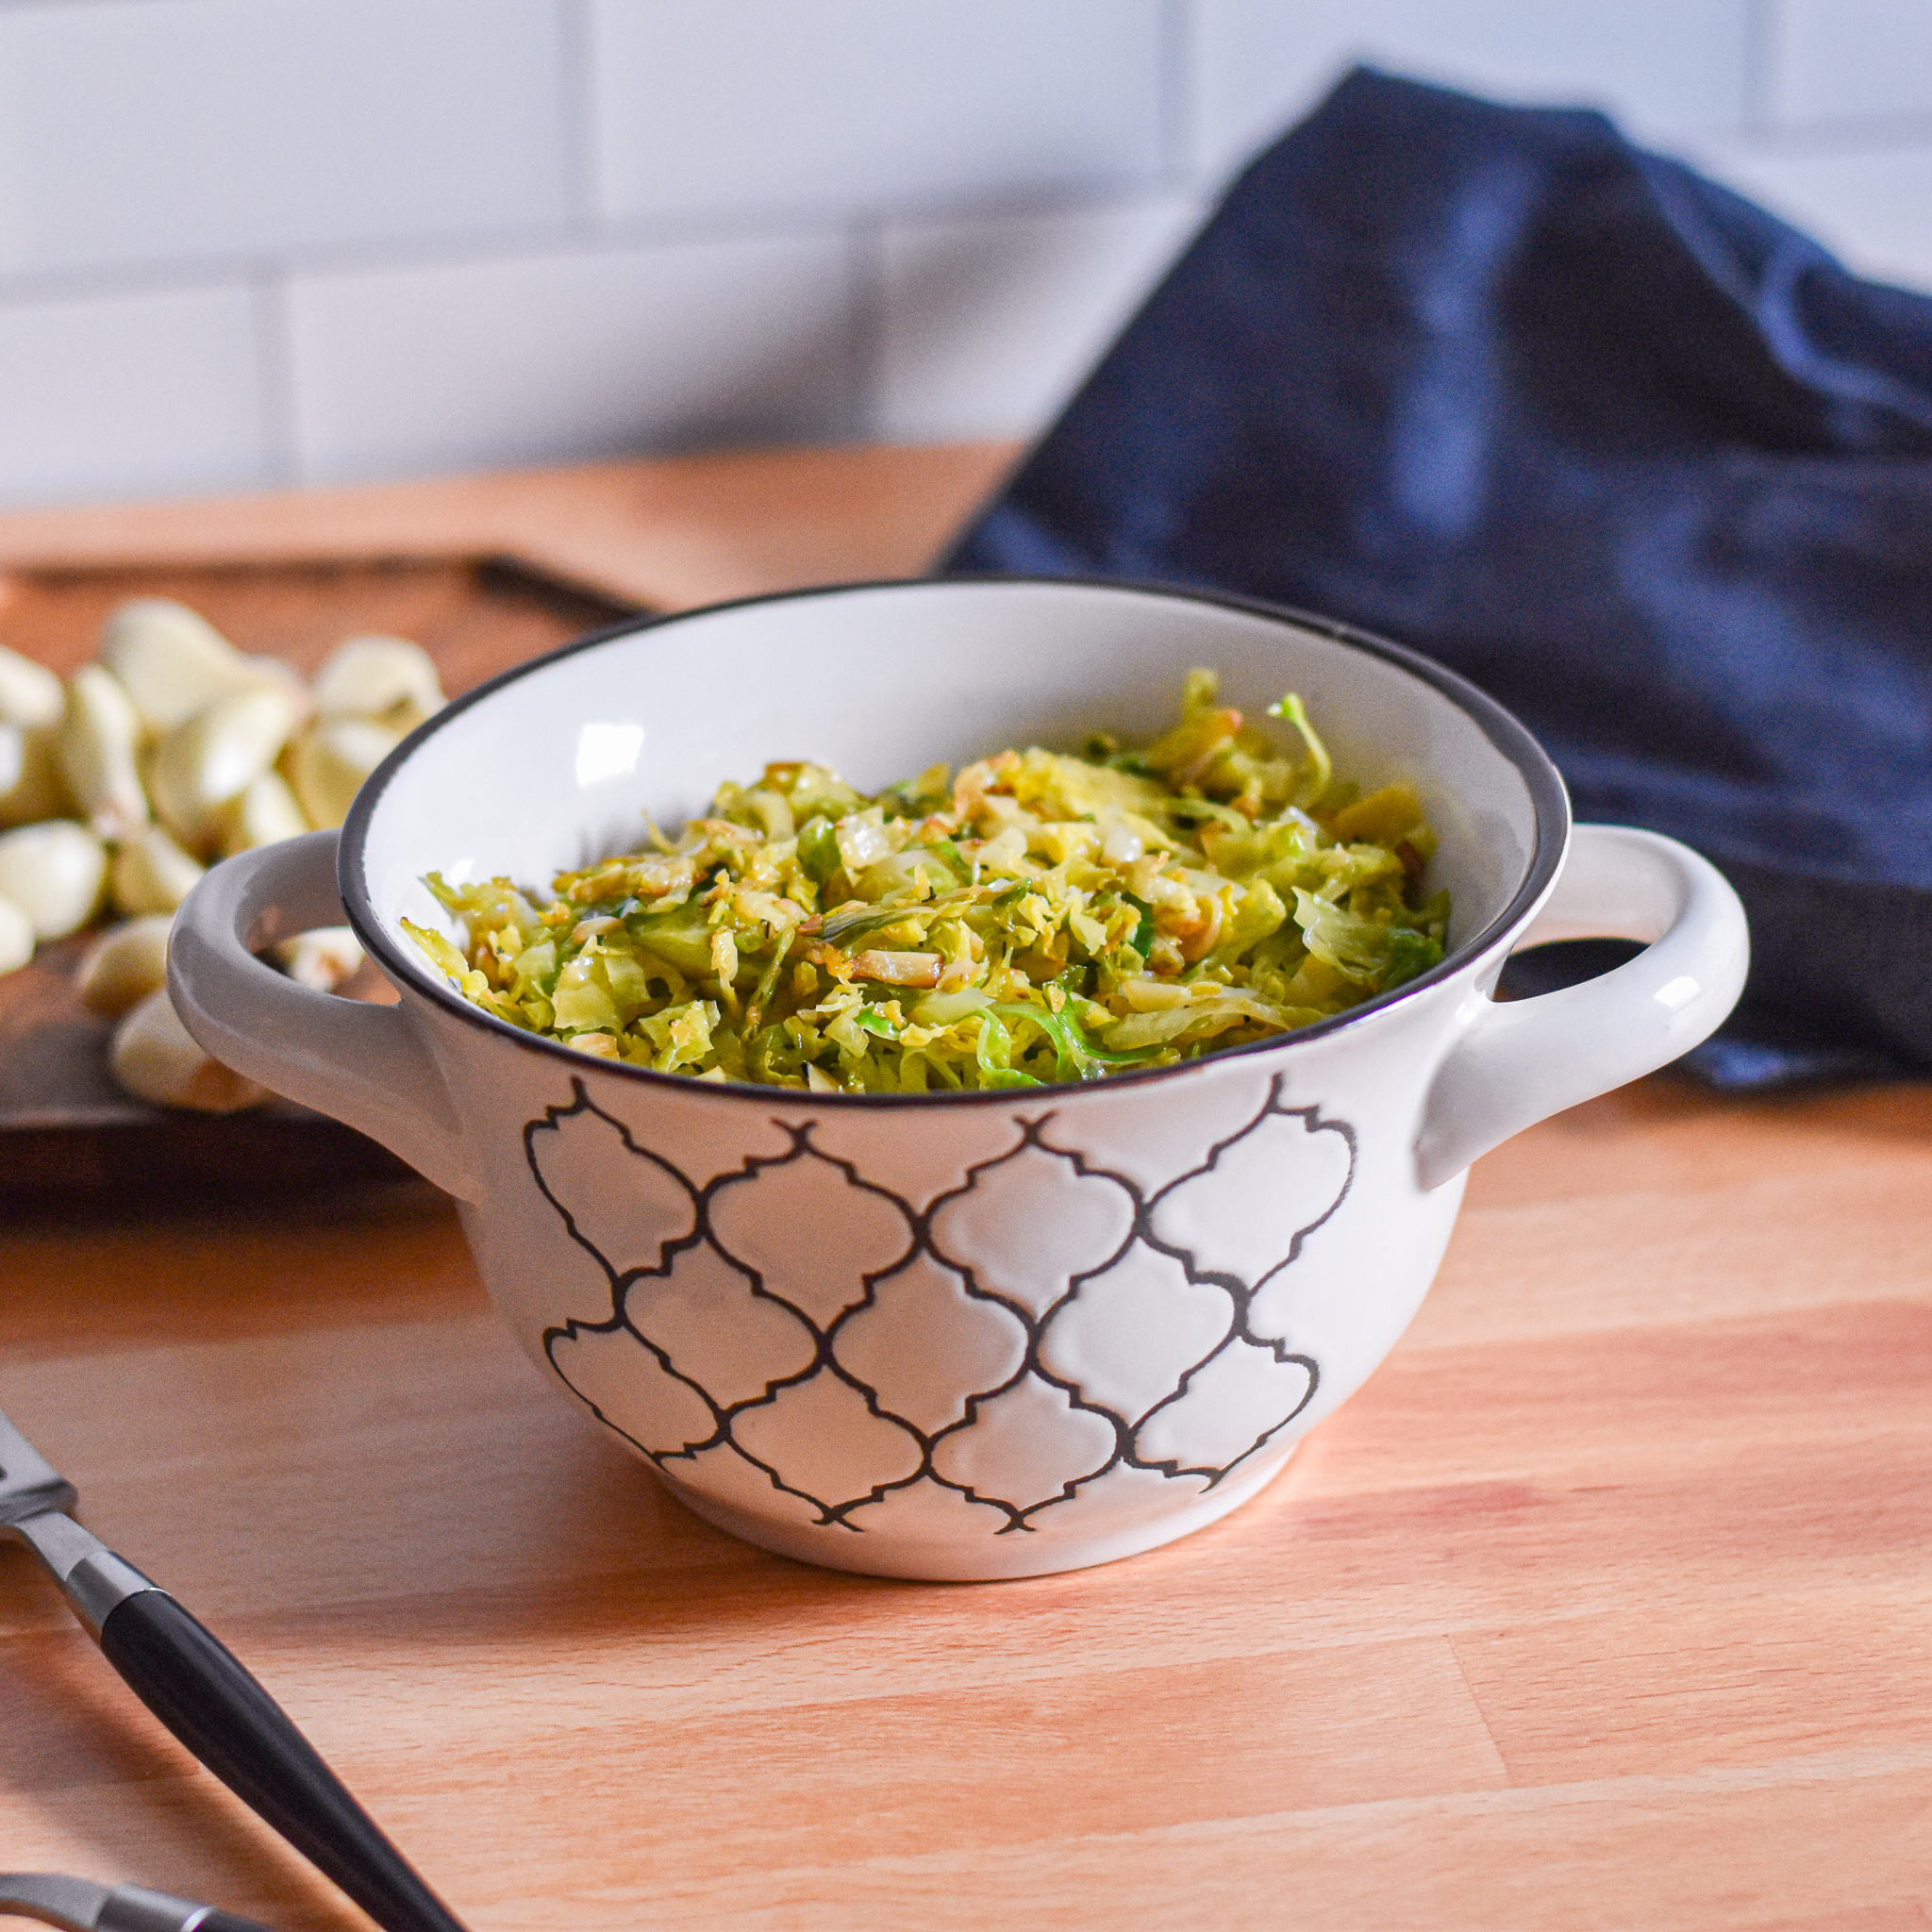 Garlic Brussel Sprouts by Candidly Delicious